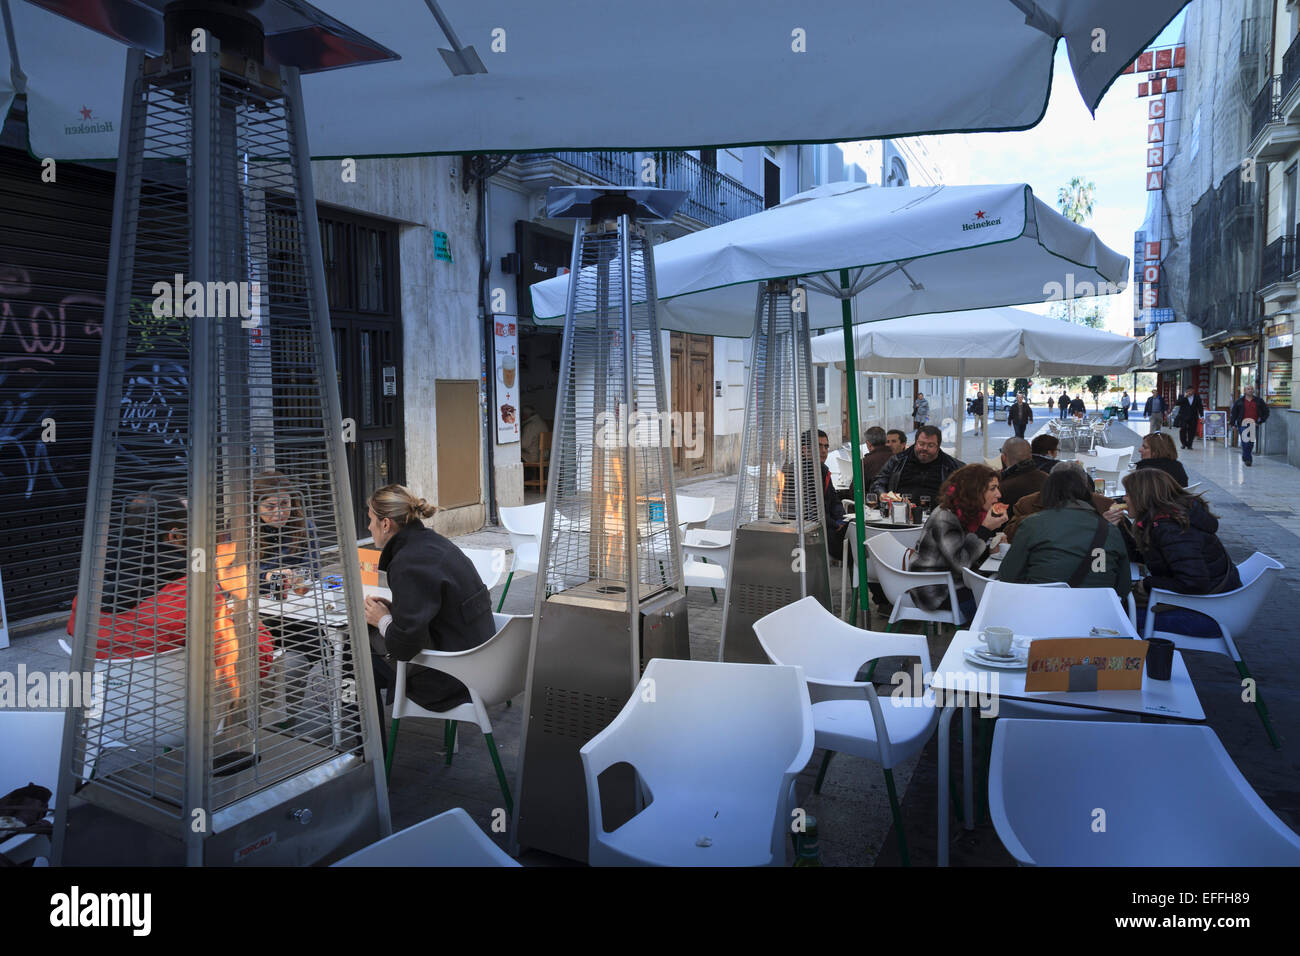 Customers at a street cafe in winter Valencia with patio flame heaters Stock Photo